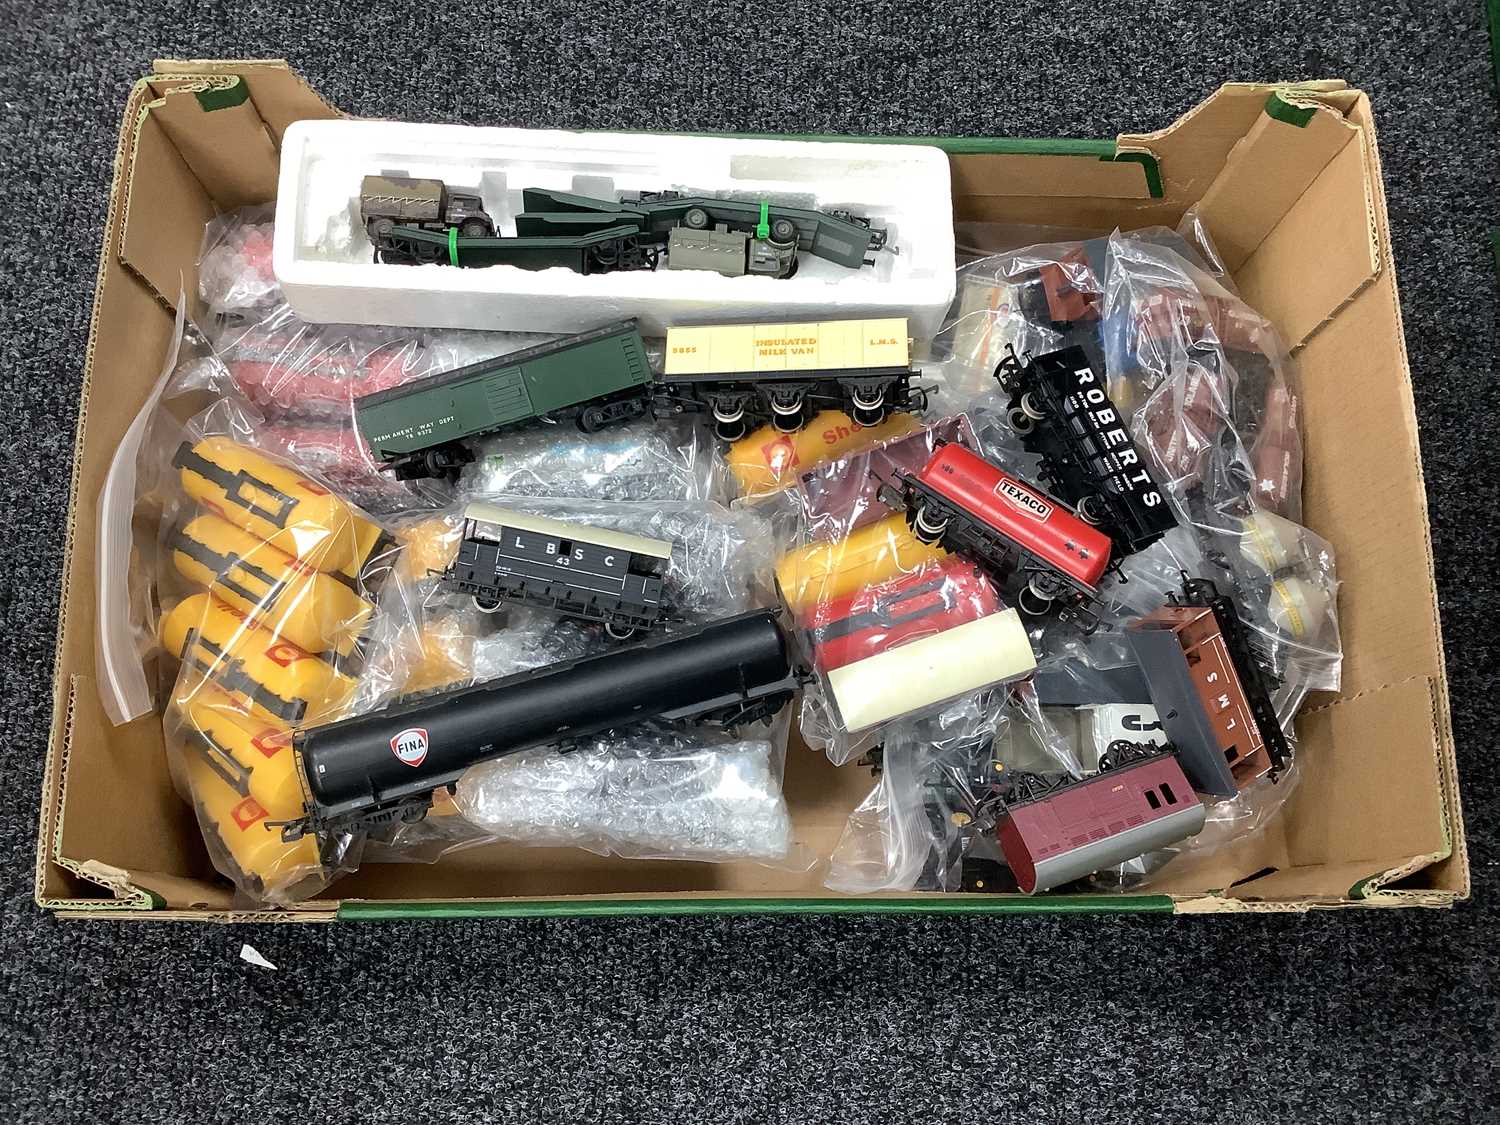 A Quantity of Outline British "OO" Gauge Rolling Stock, playworn, unboxed.